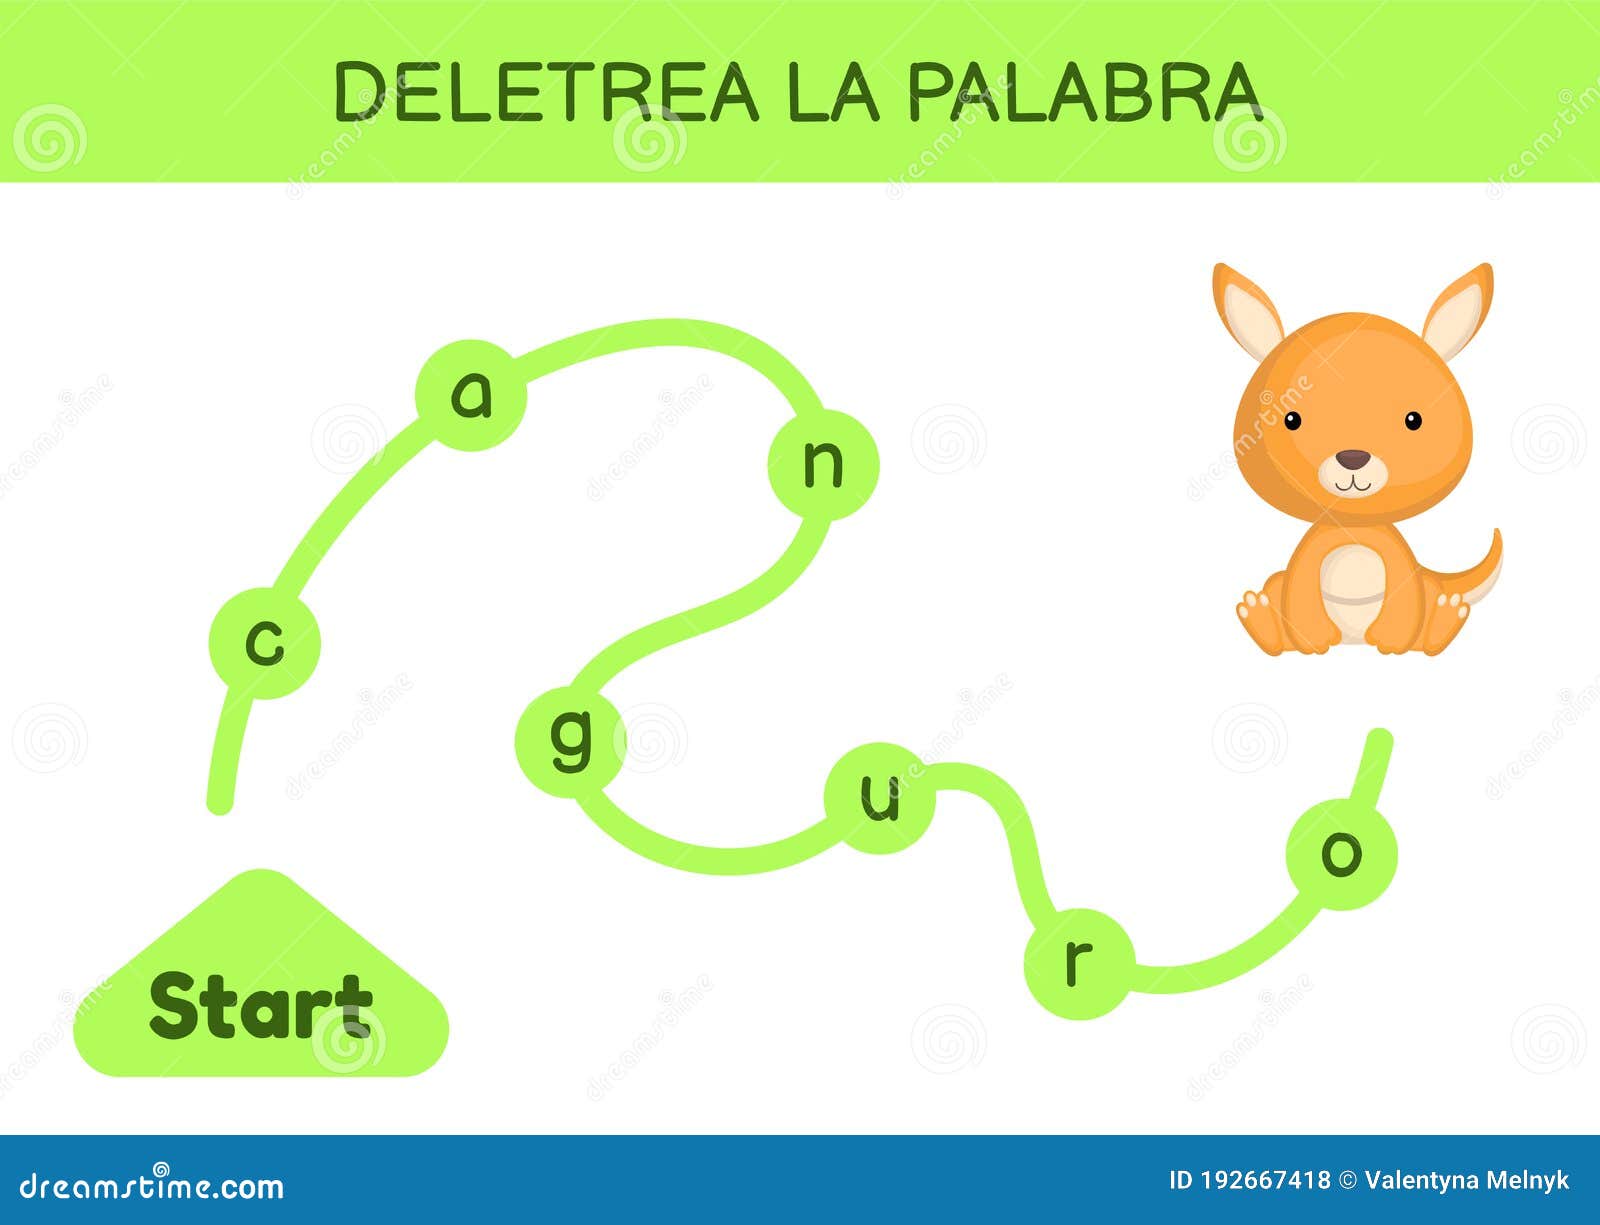 deletrea la palabra - spell the word. maze for kids. spelling word game template. learn to read word kangaroo. activity page for